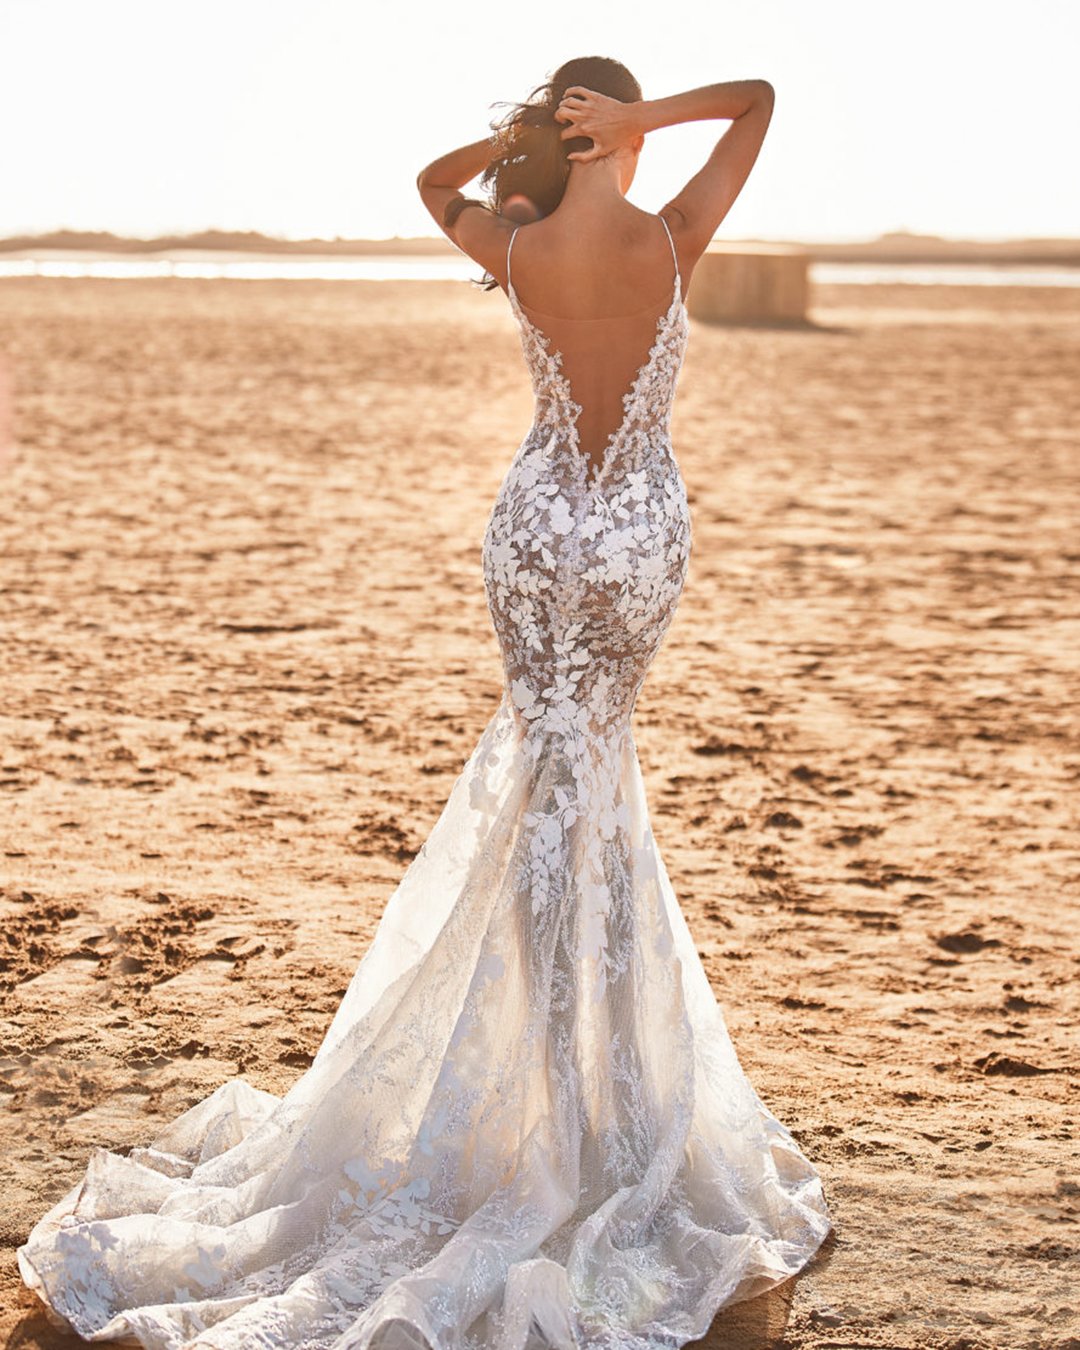 Hottest Wedding Dresses That Are Wow For Your Big Day